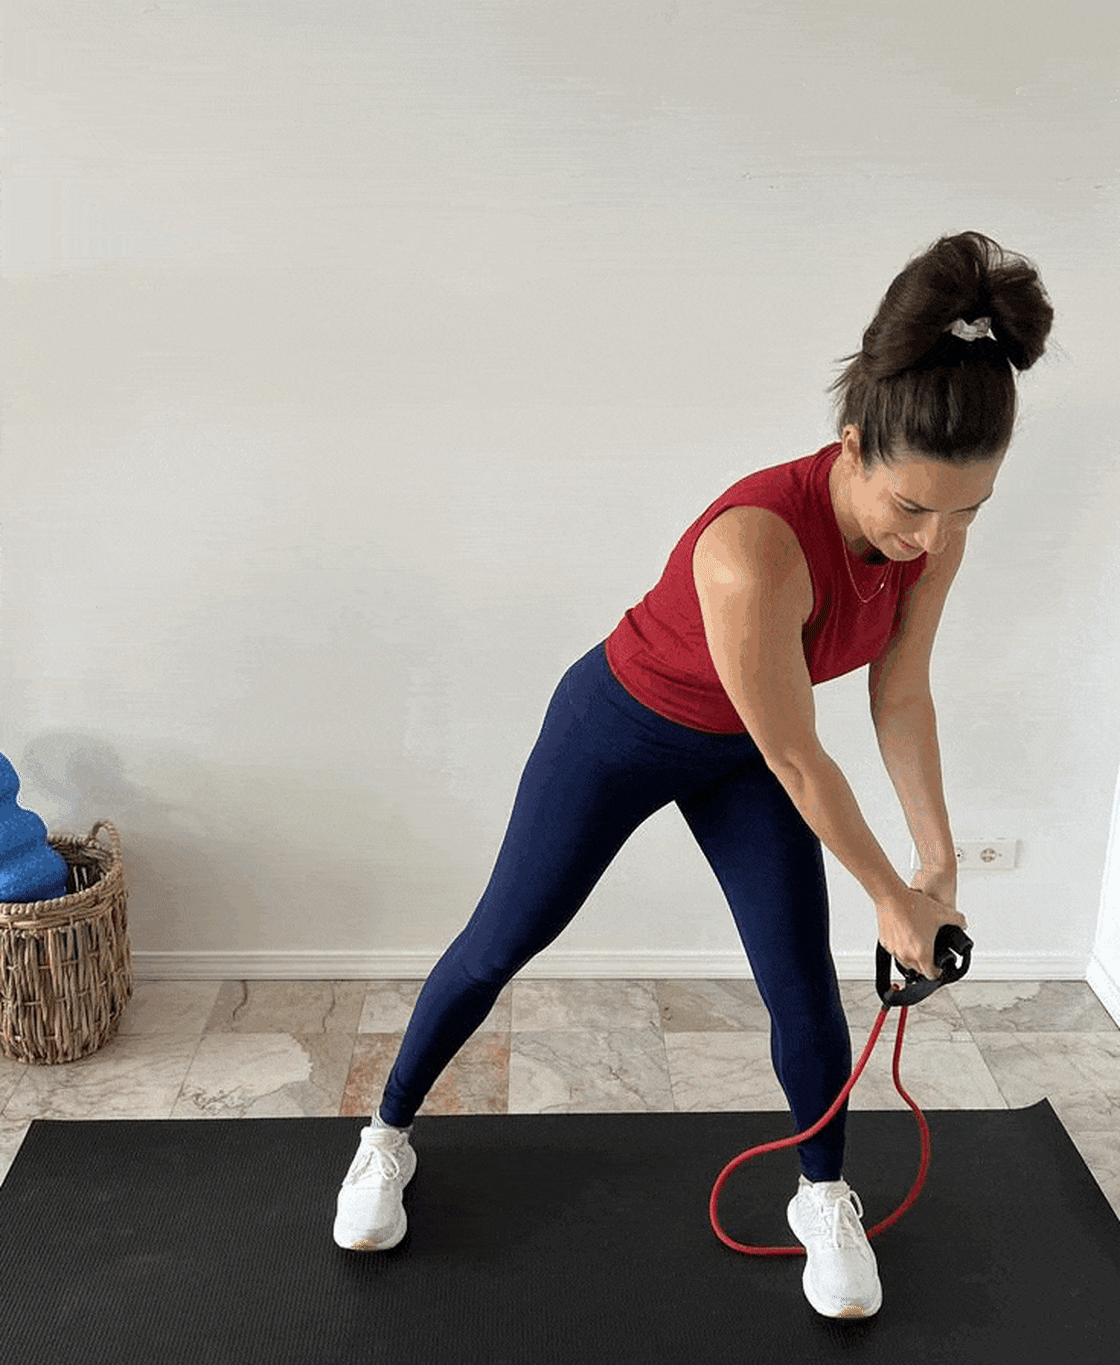 12 Resistance Band Exercises for Your Upper Body